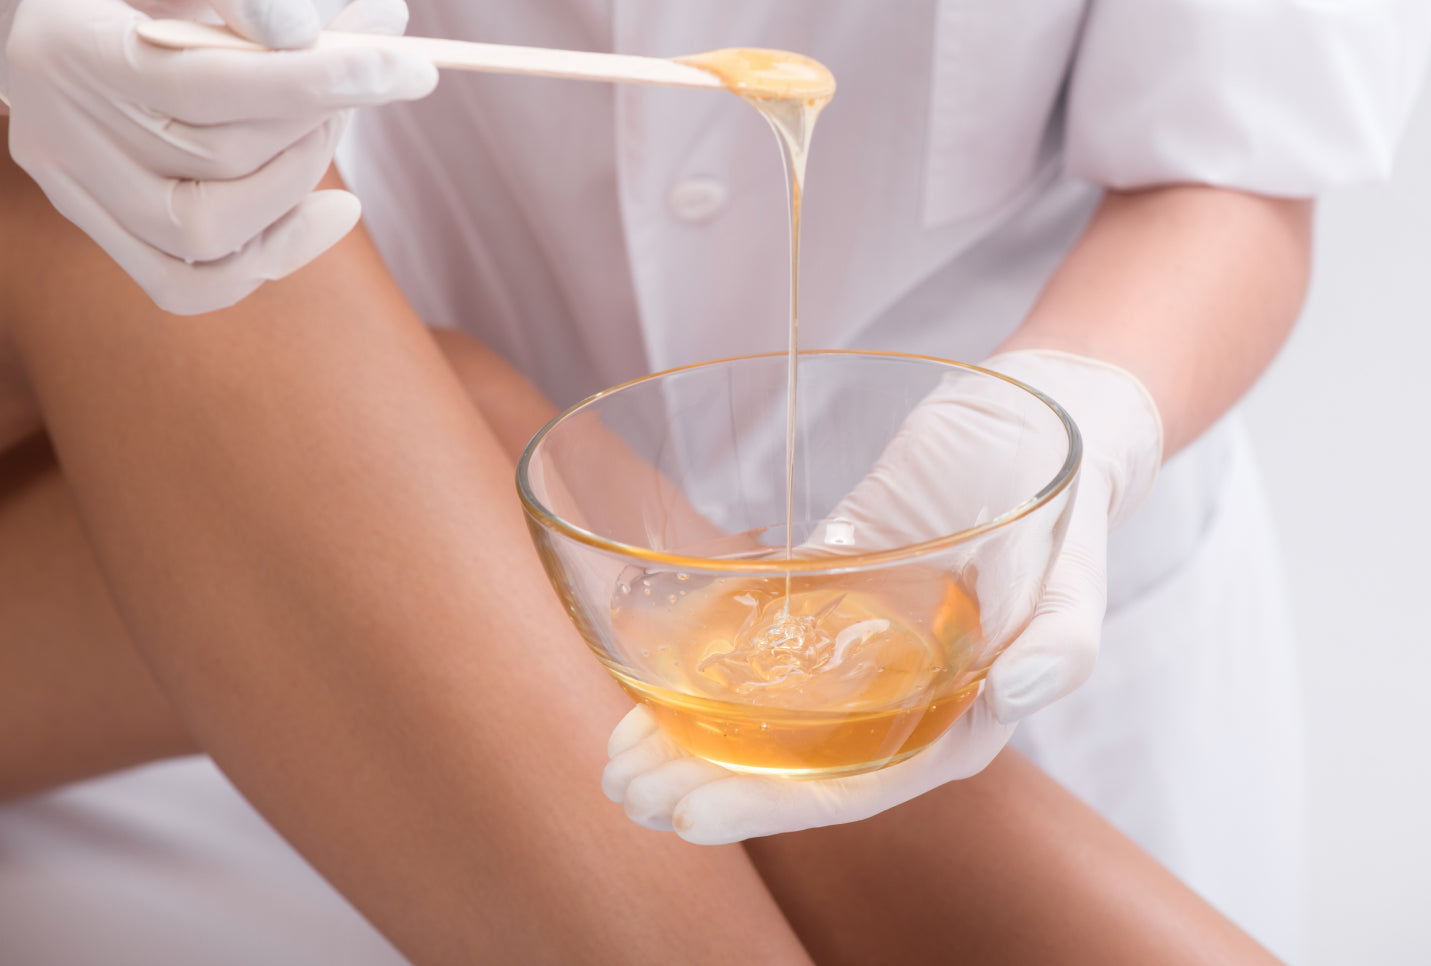 How To Prevent Ingrown Hairs After Waxing